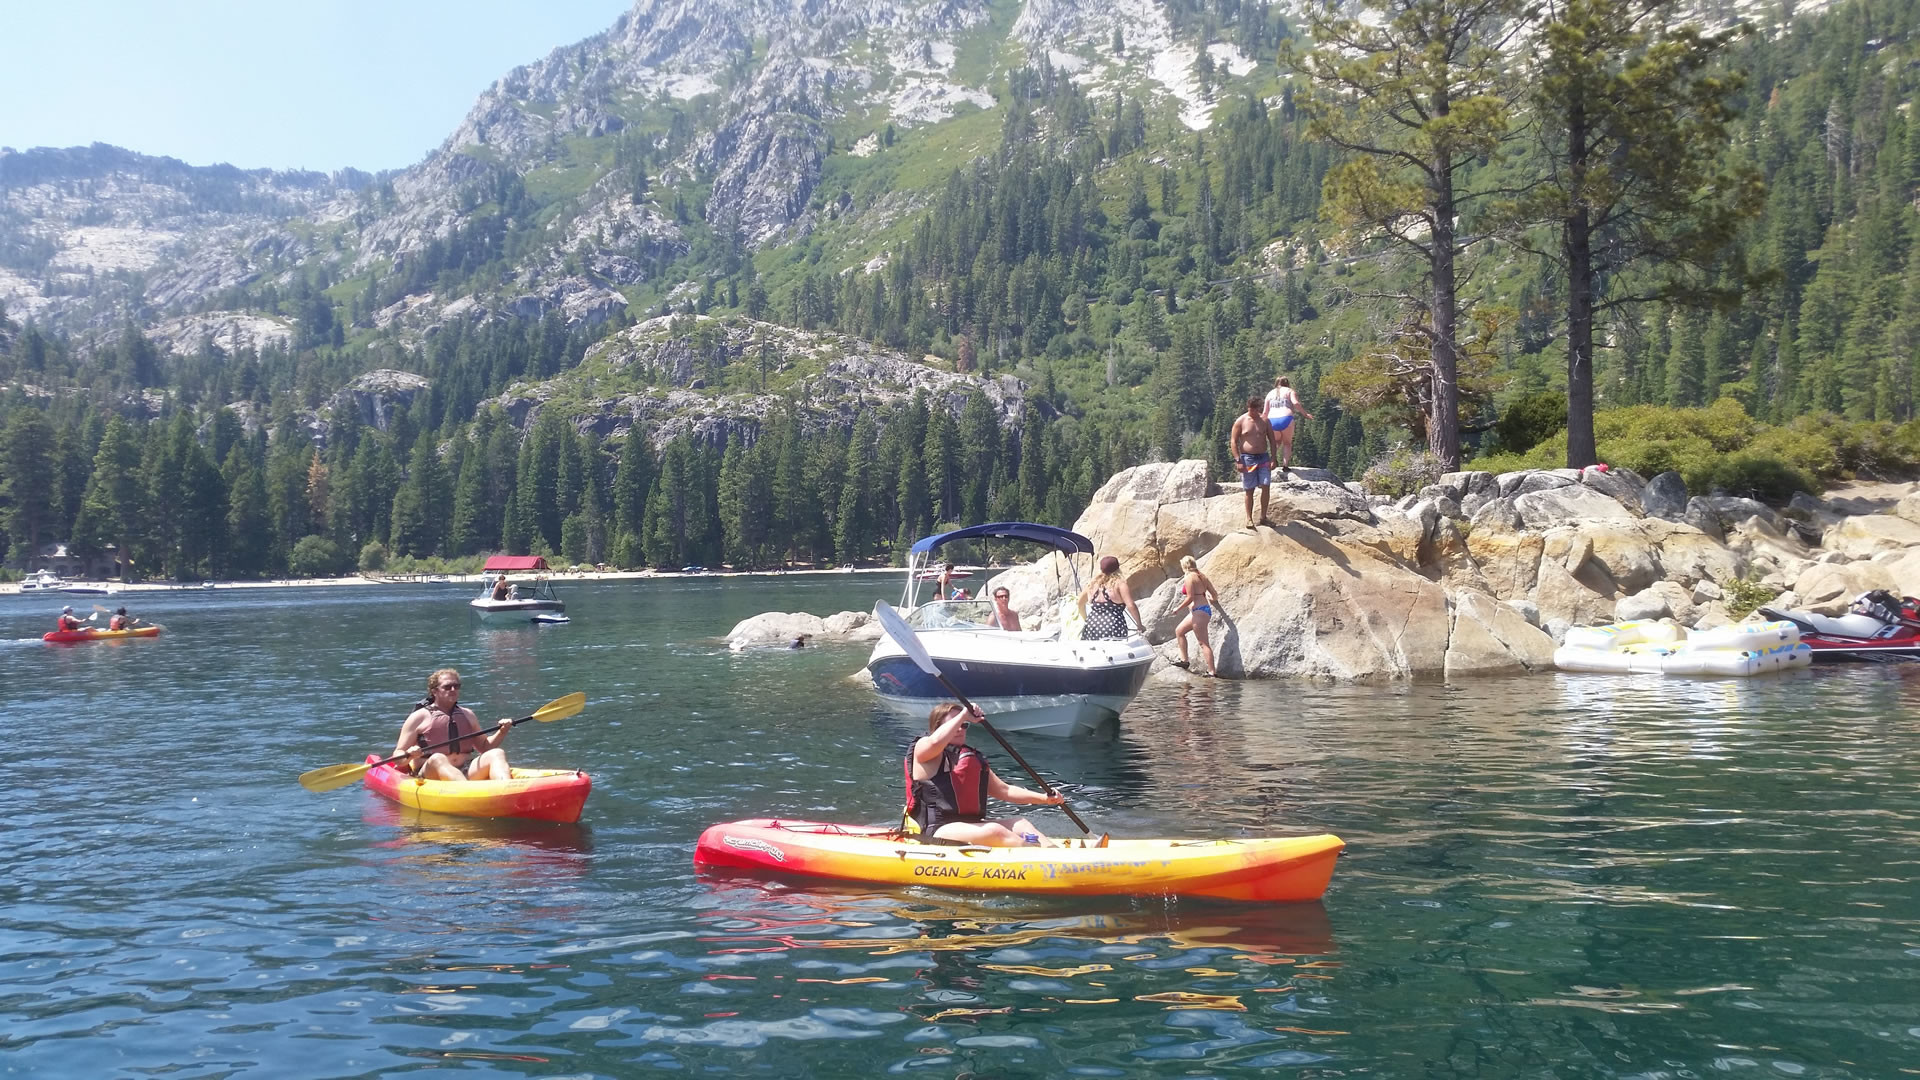 1920x1080 Lake Tahoe Boat Rental, Tours and Water Sports.